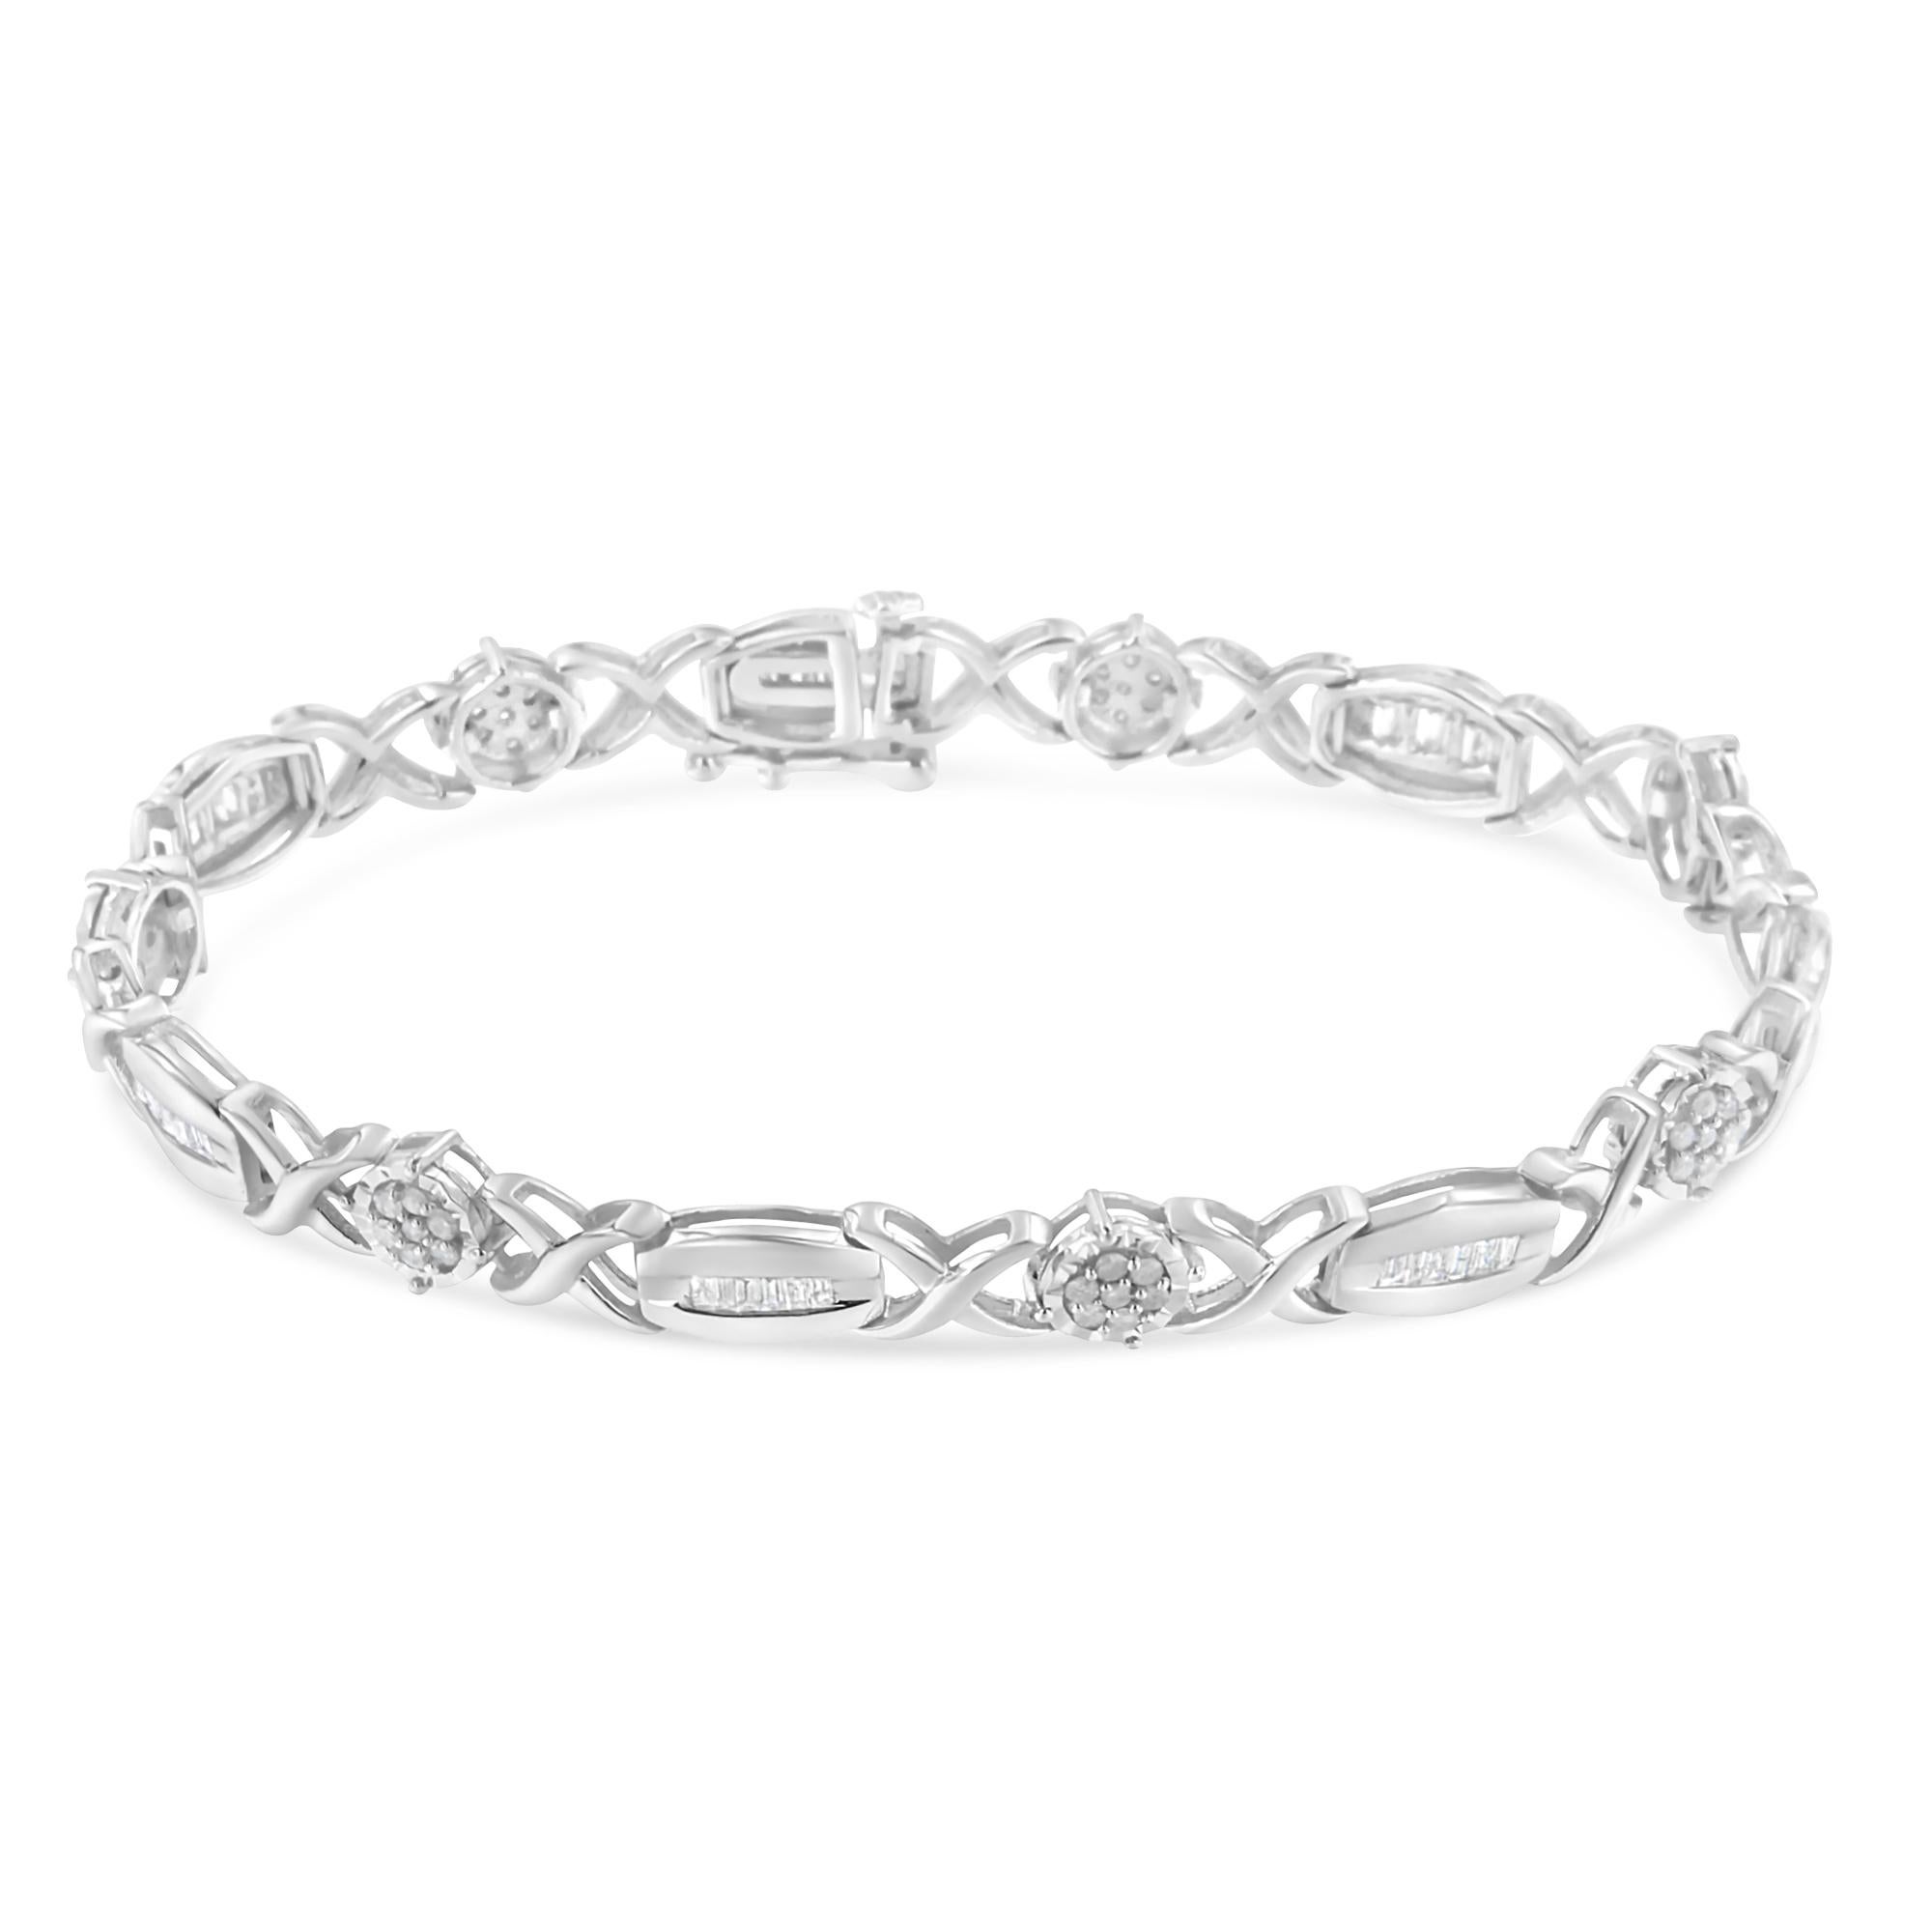 This gorgeous sterling silver bracelet boasts an incredibly unique design of 